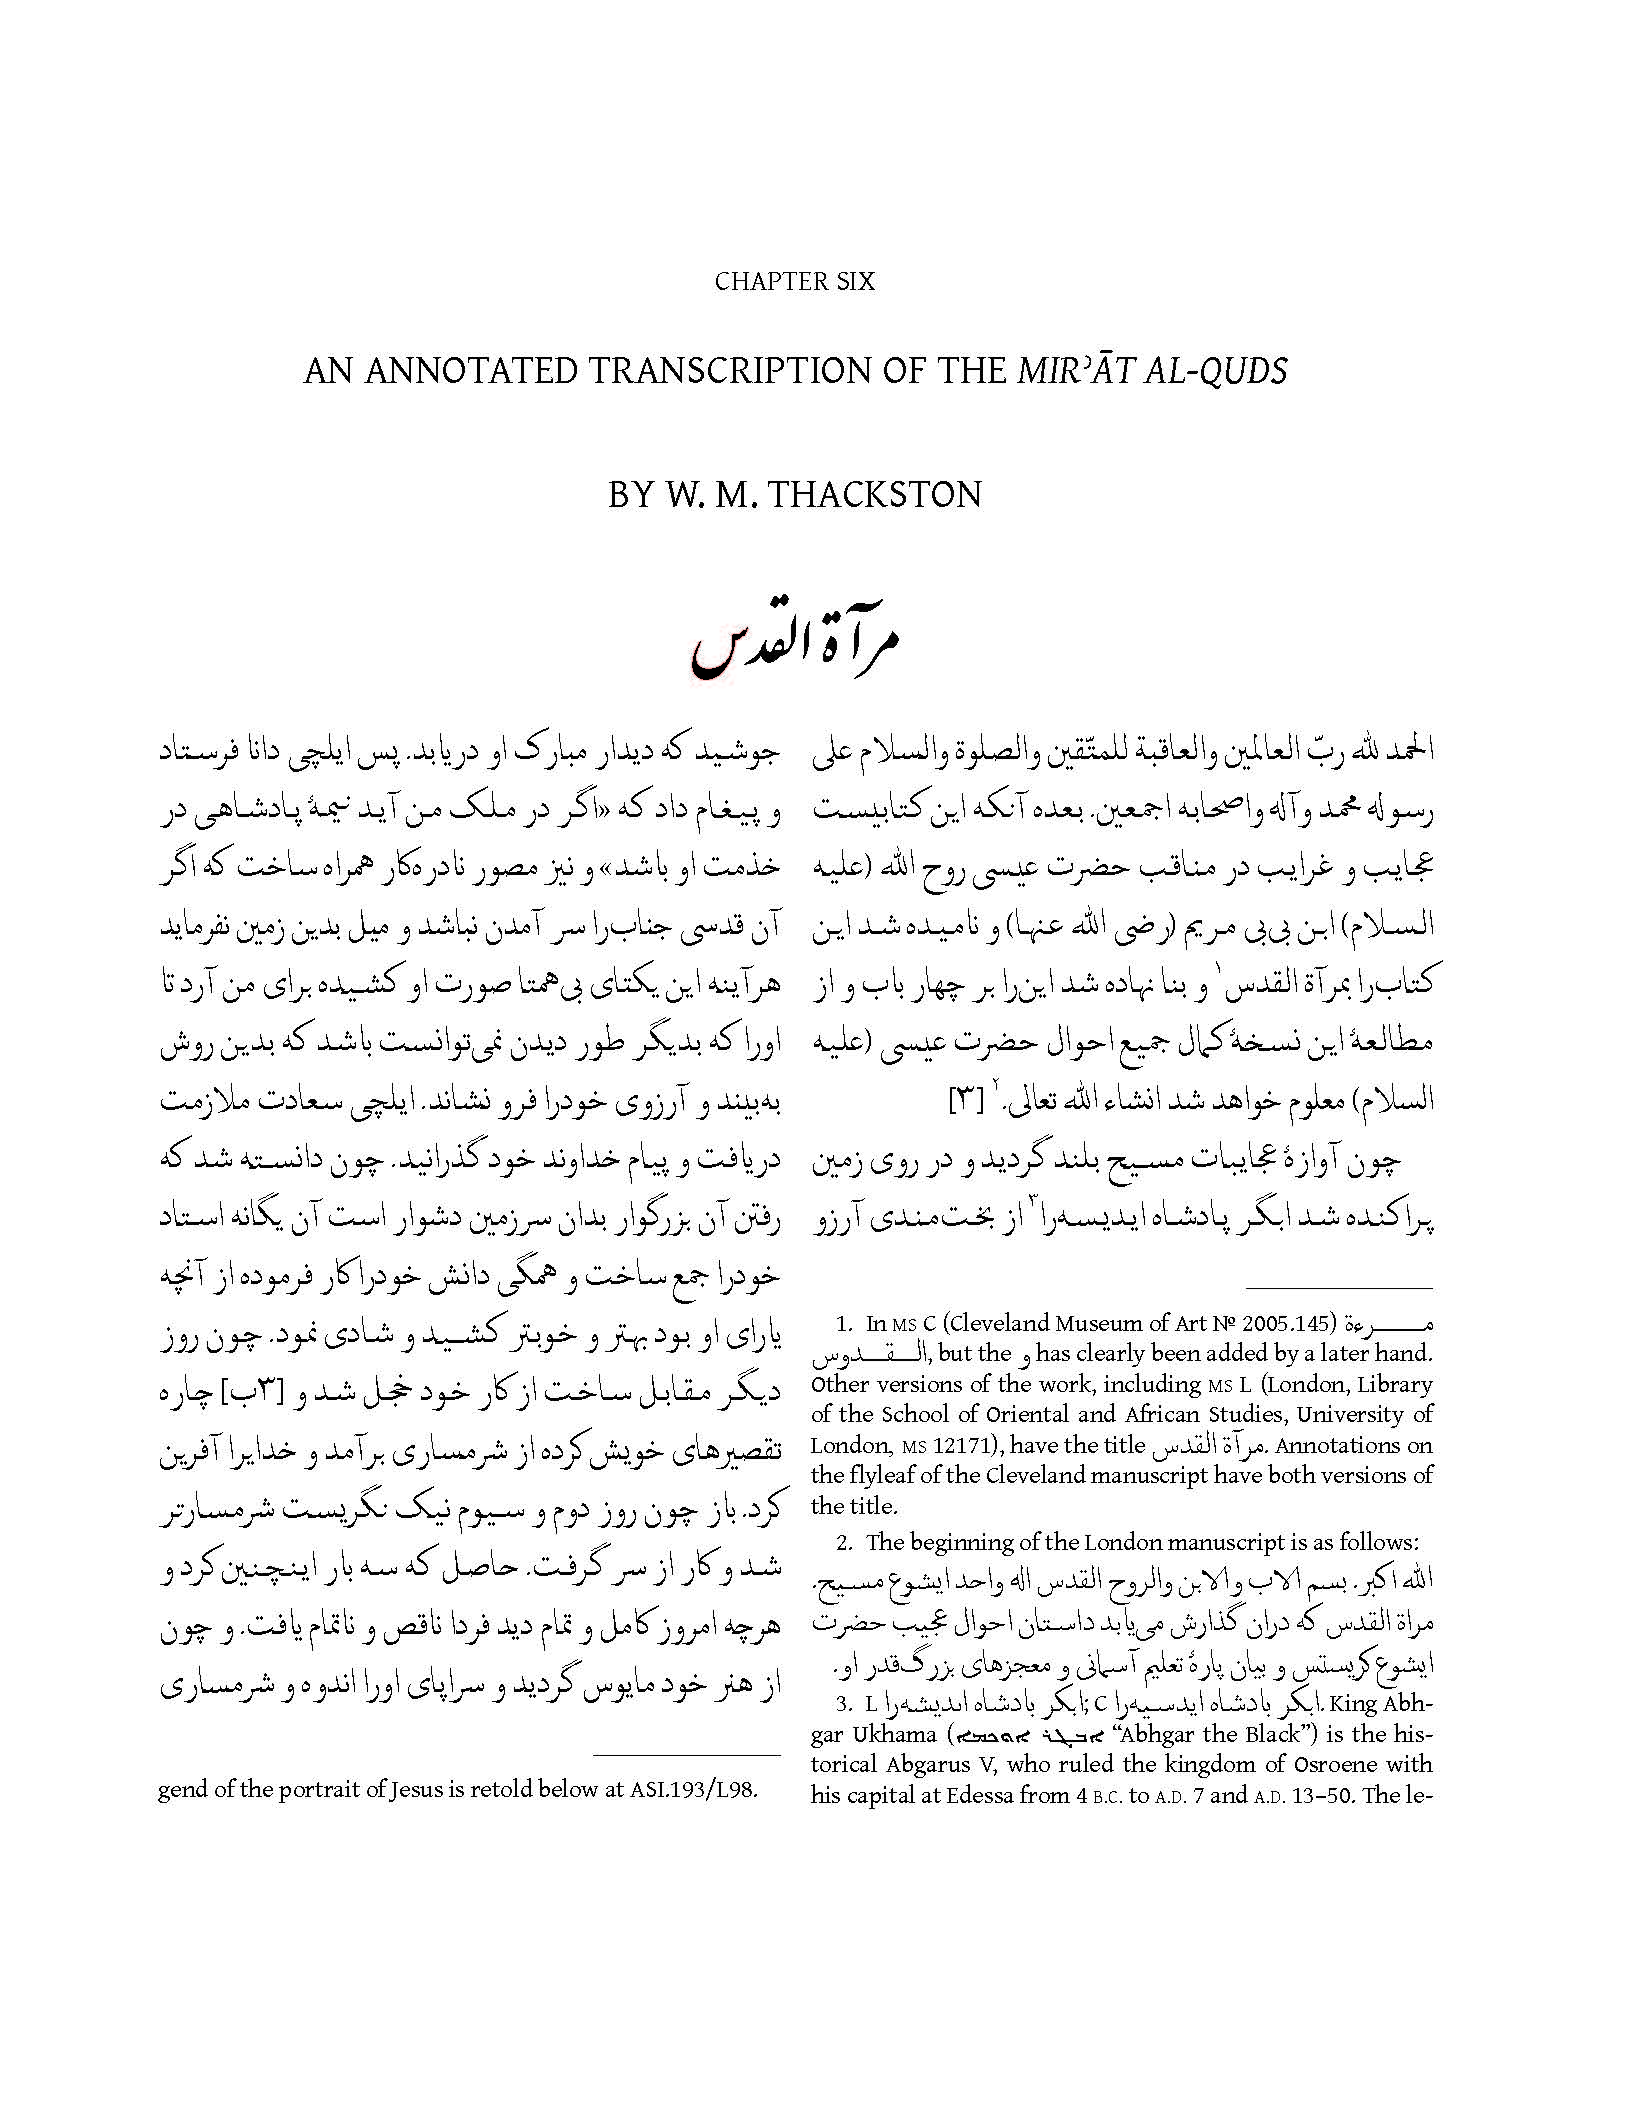 Chapter 6: An Annotated Transcription of the Mir'at al-Quds